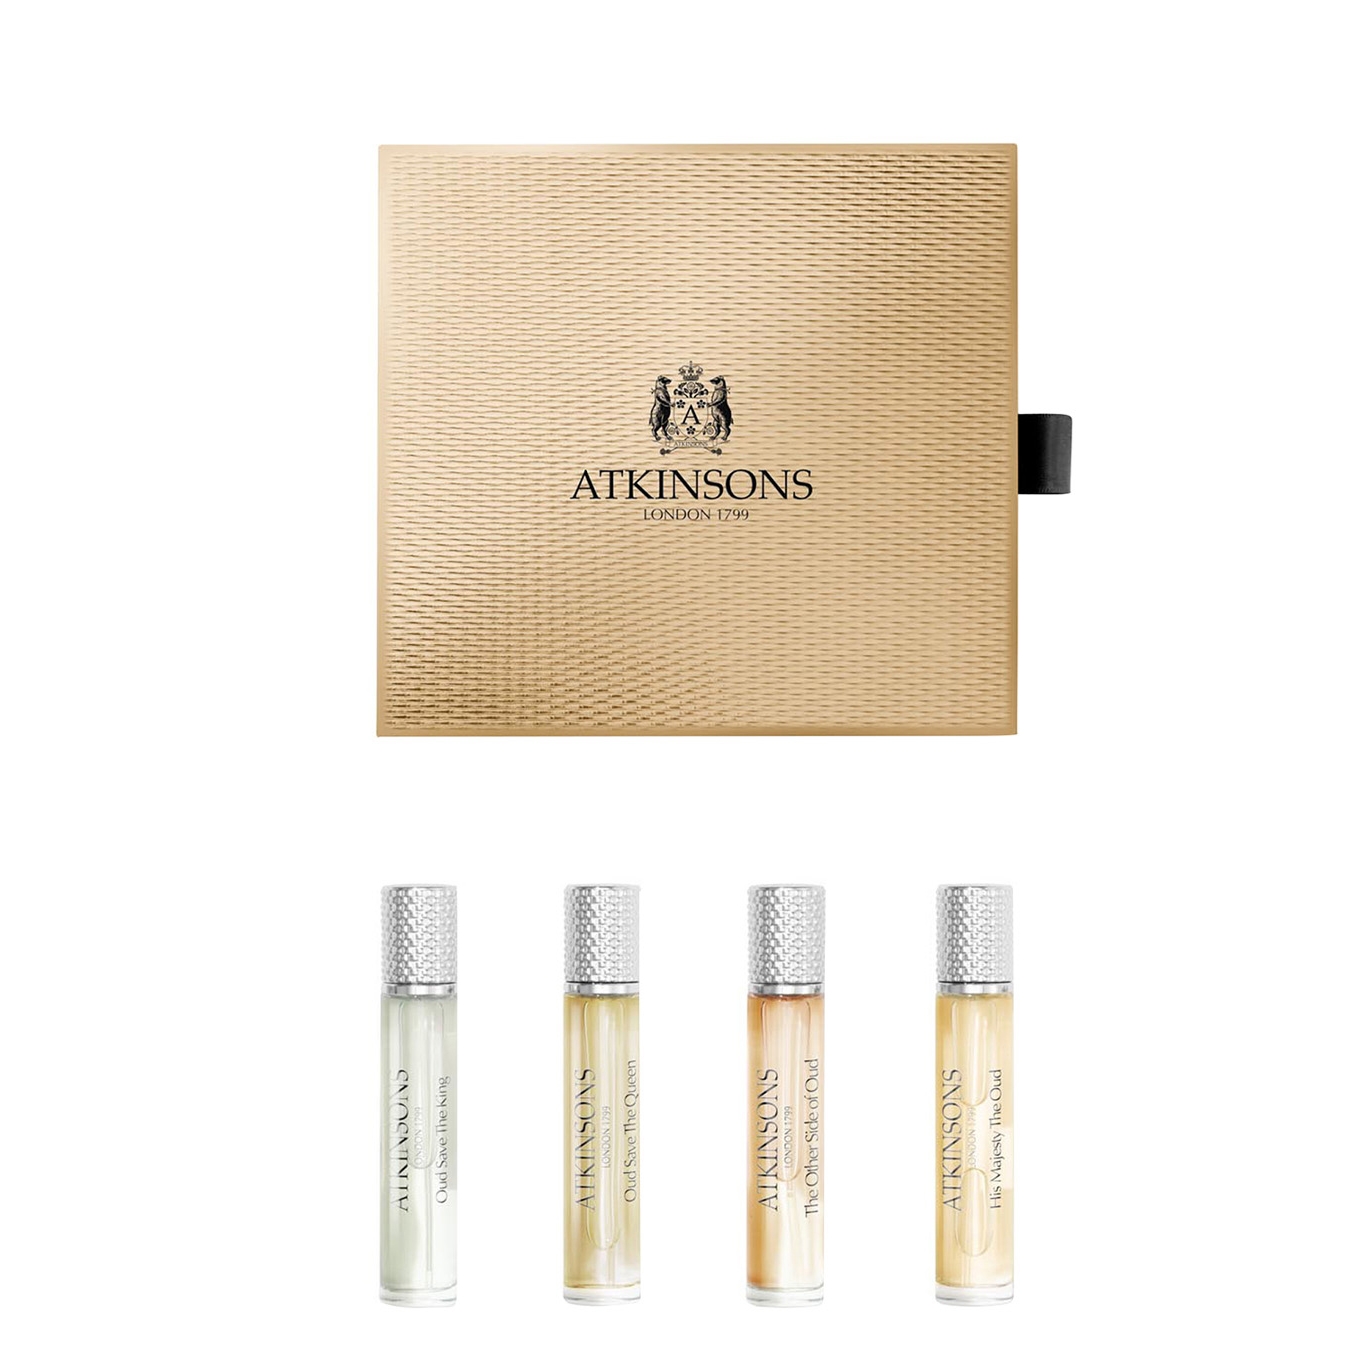 Atkinsons Jewels Of The Orient Discovery Set 4 X 10ml